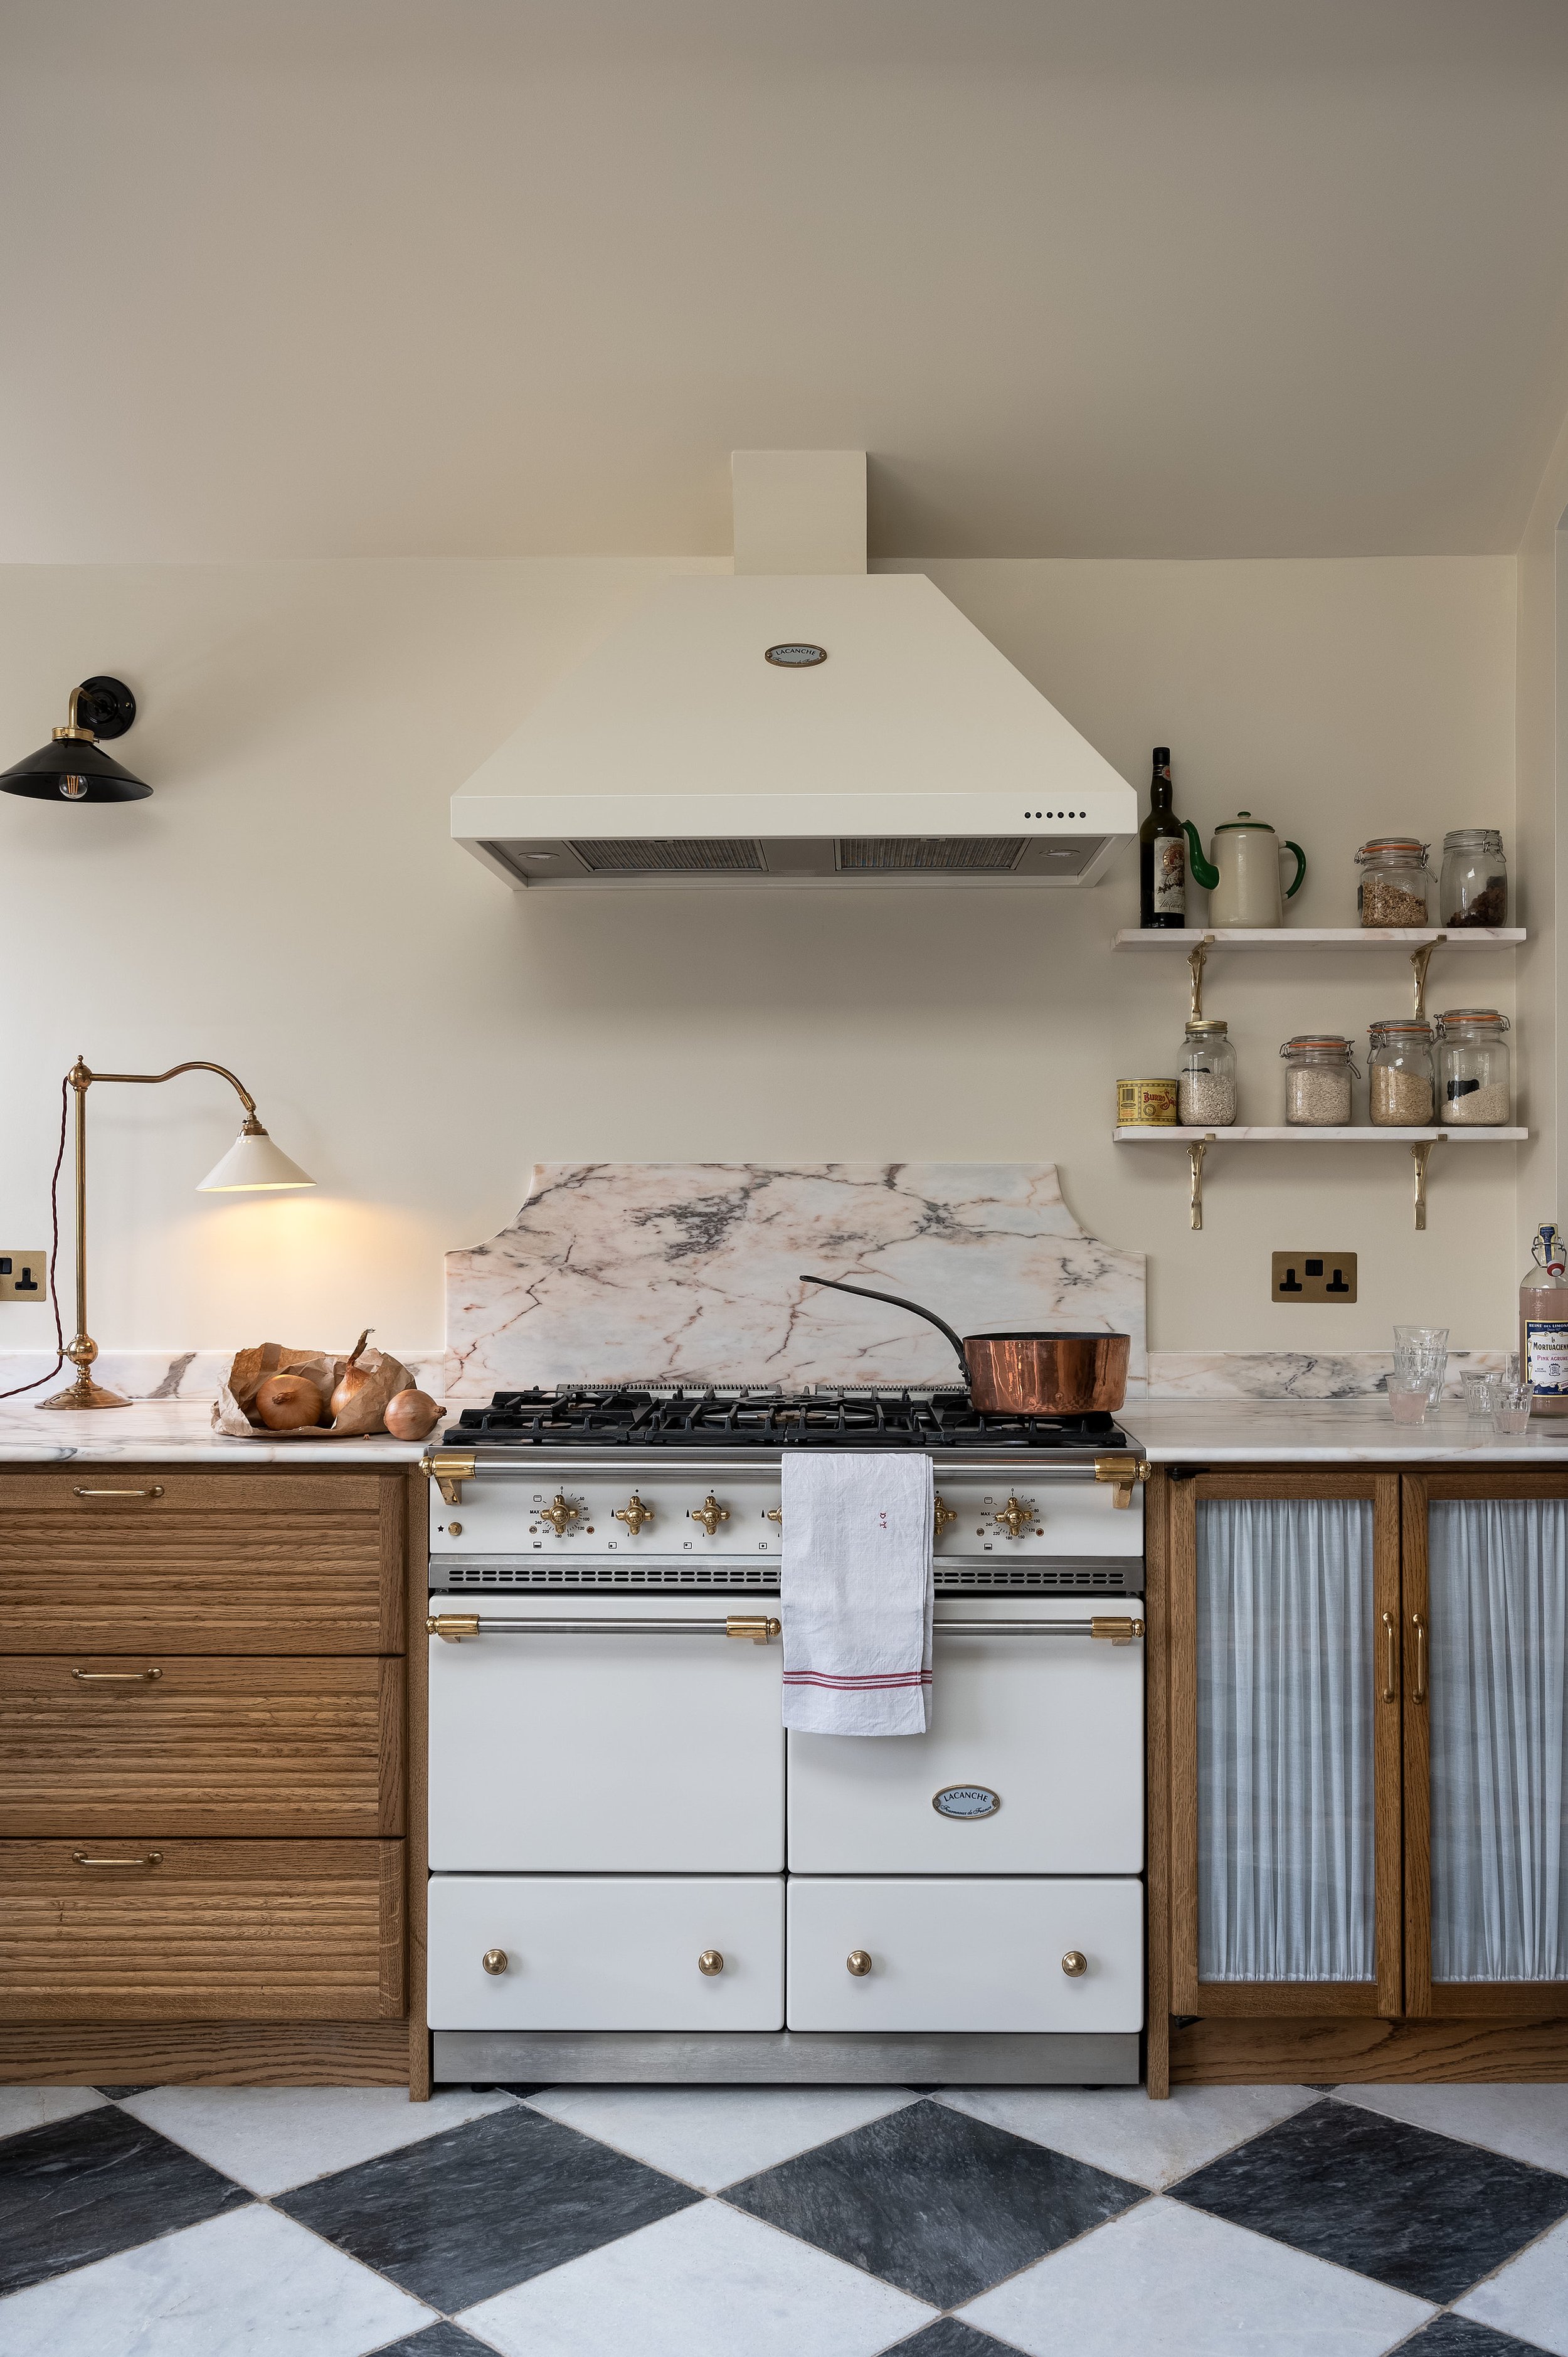 Take A Look At This Beautiful Mid-Century Style Wood Kitchen By deVOL ...